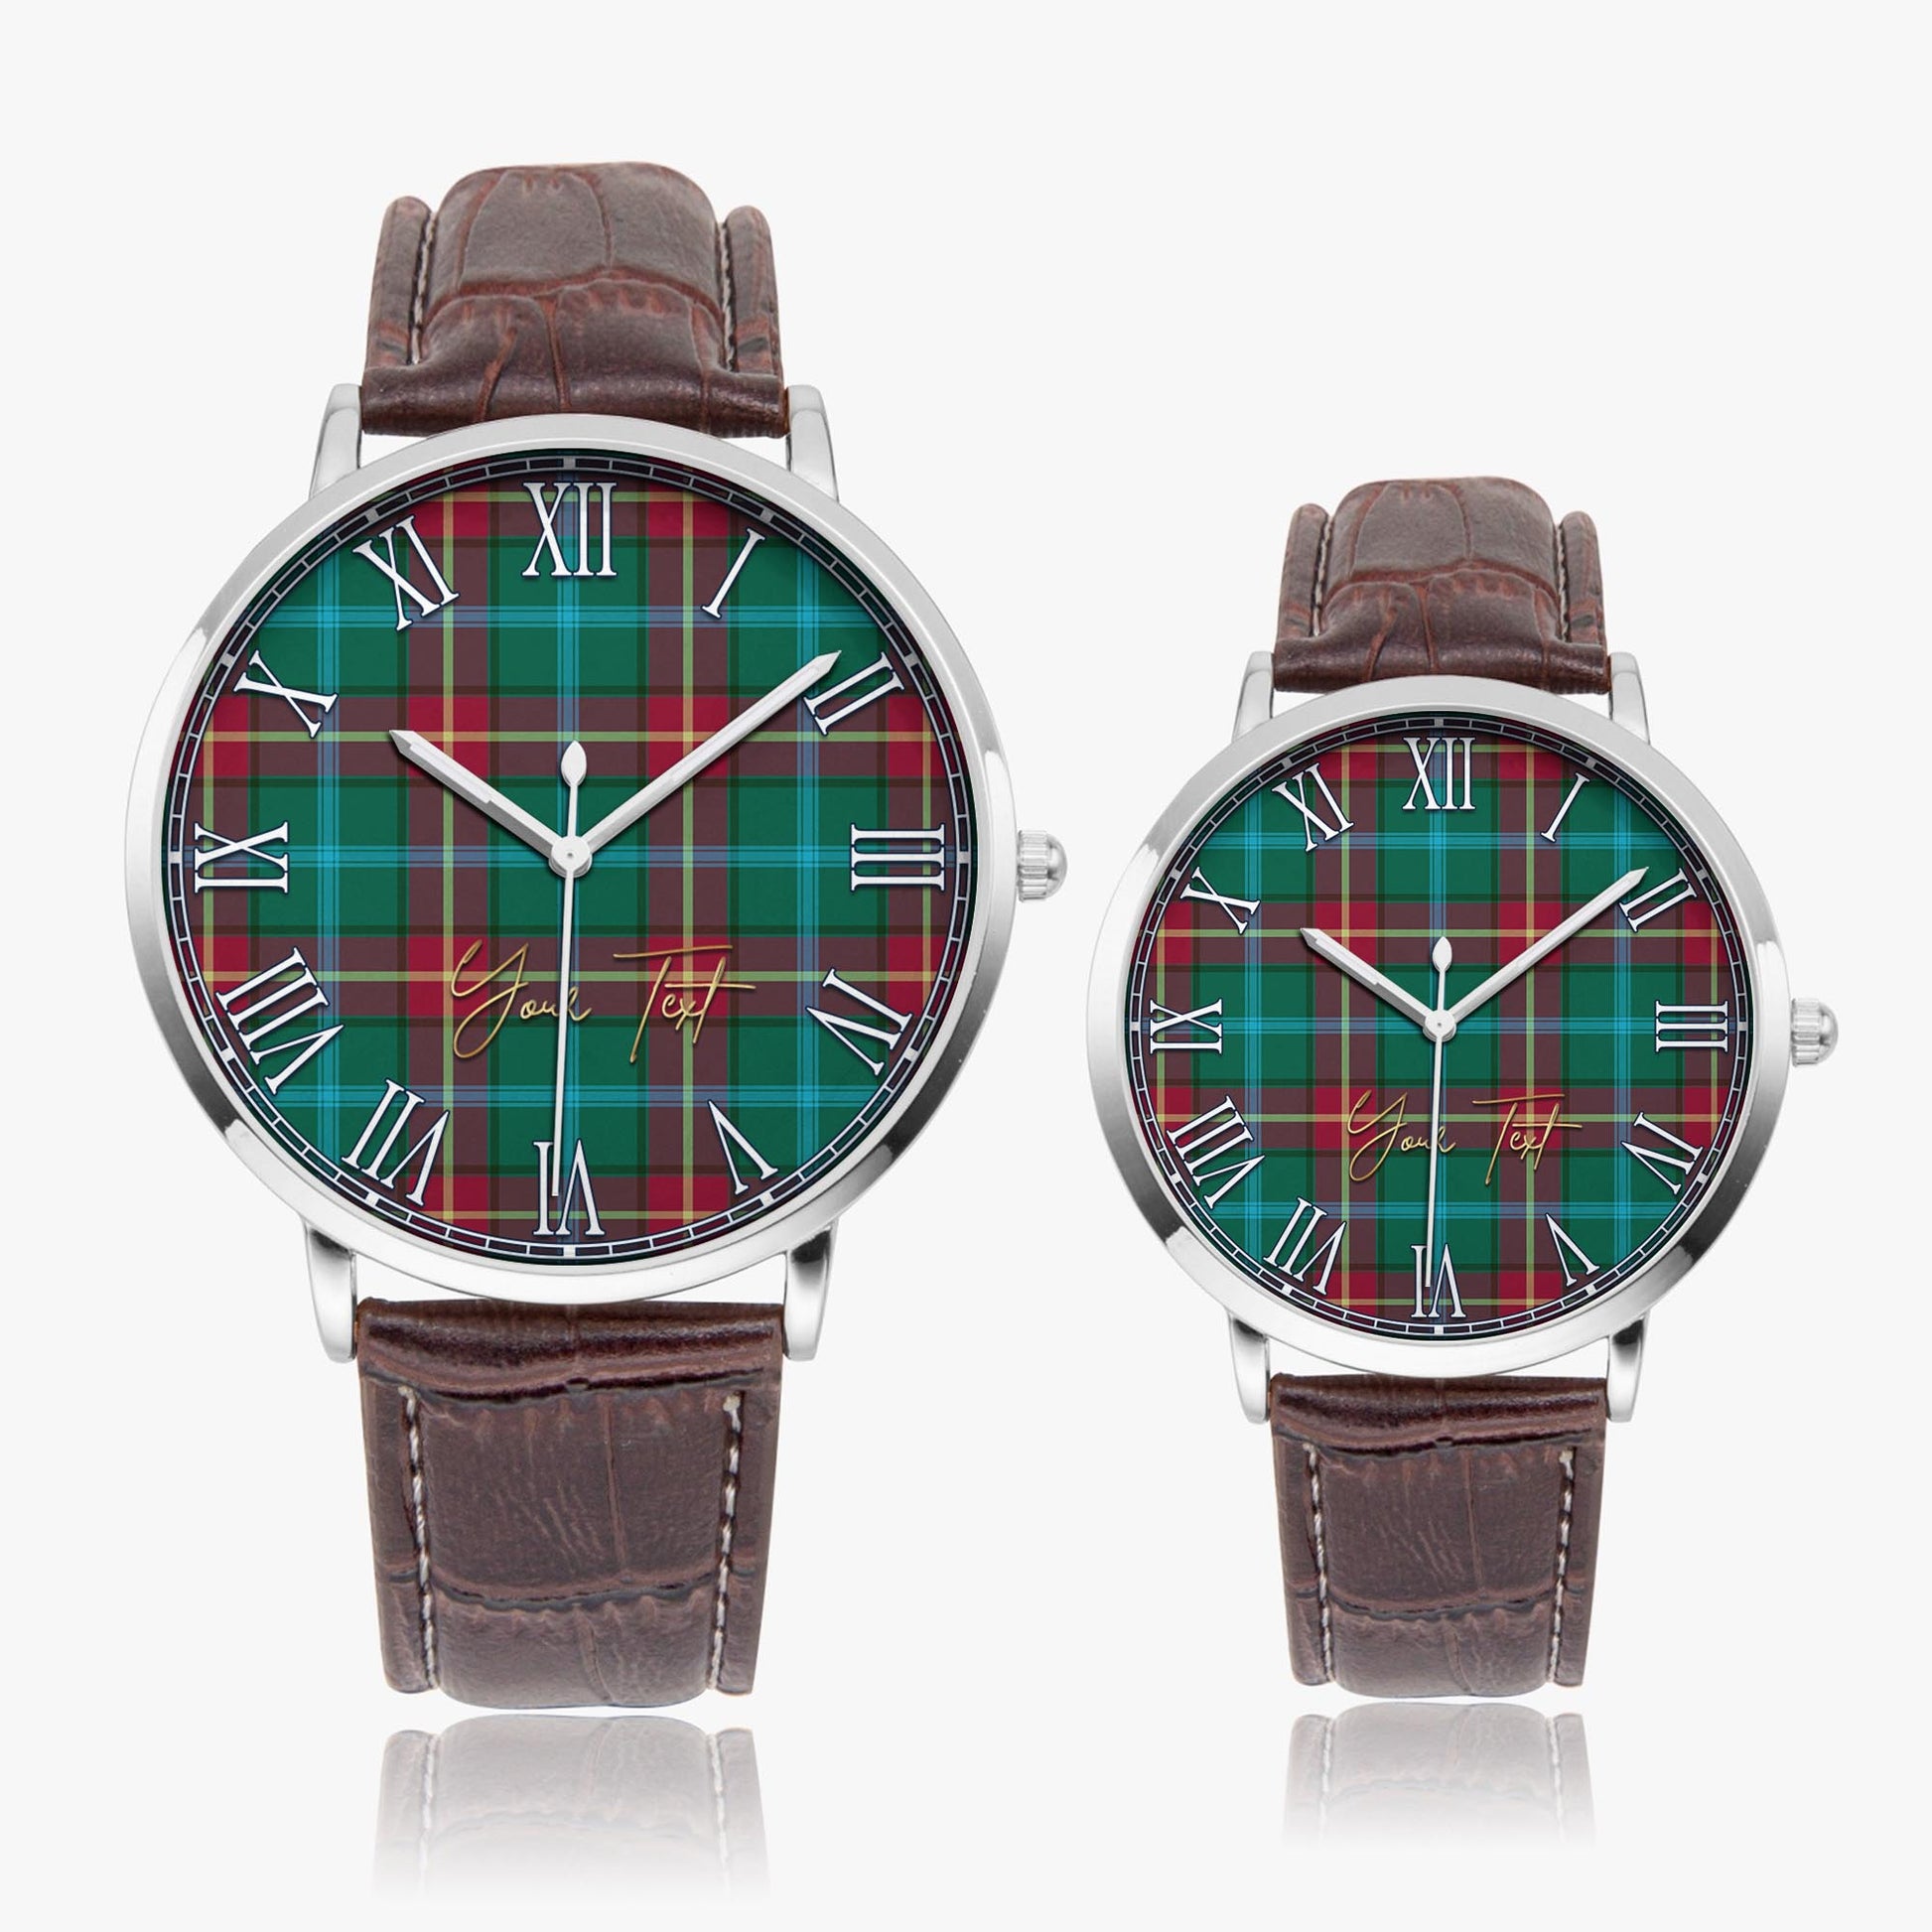 Manitoba Province Canada Tartan Personalized Your Text Leather Trap Quartz Watch Ultra Thin Silver Case With Brown Leather Strap - Tartanvibesclothing